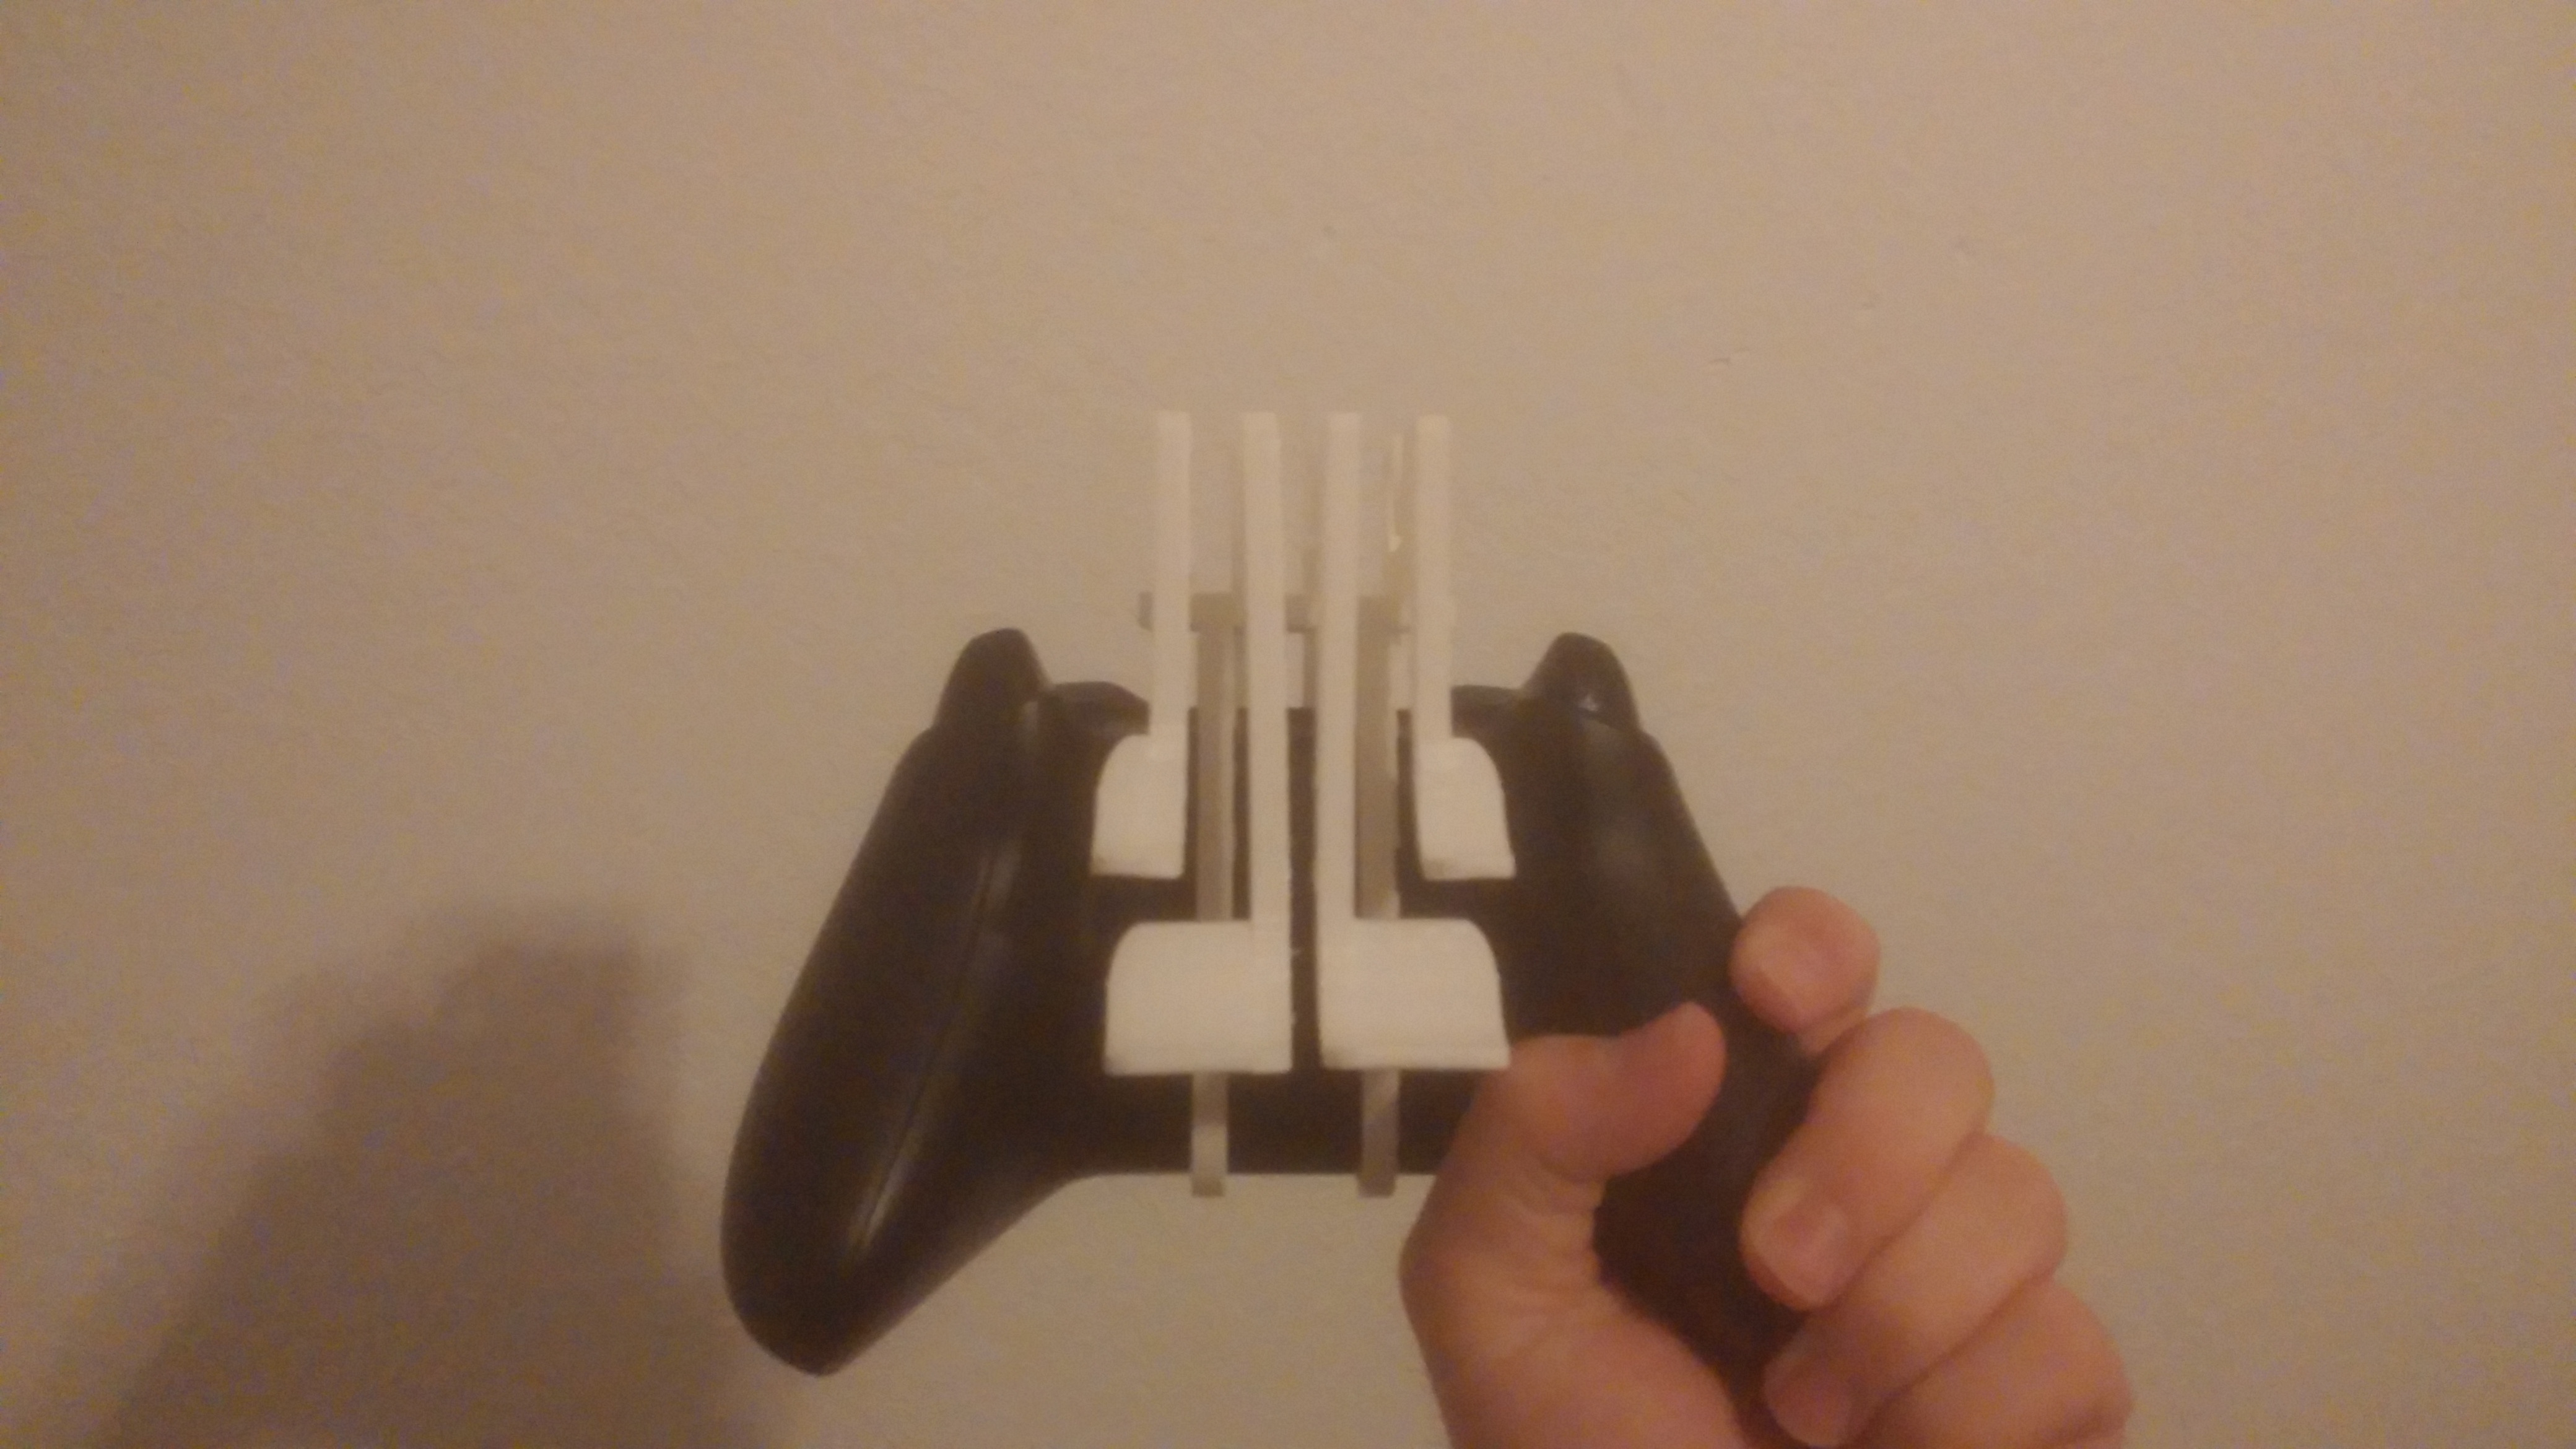 3D Printed Xbox One Controller Paddles All 4 paddles by Chris